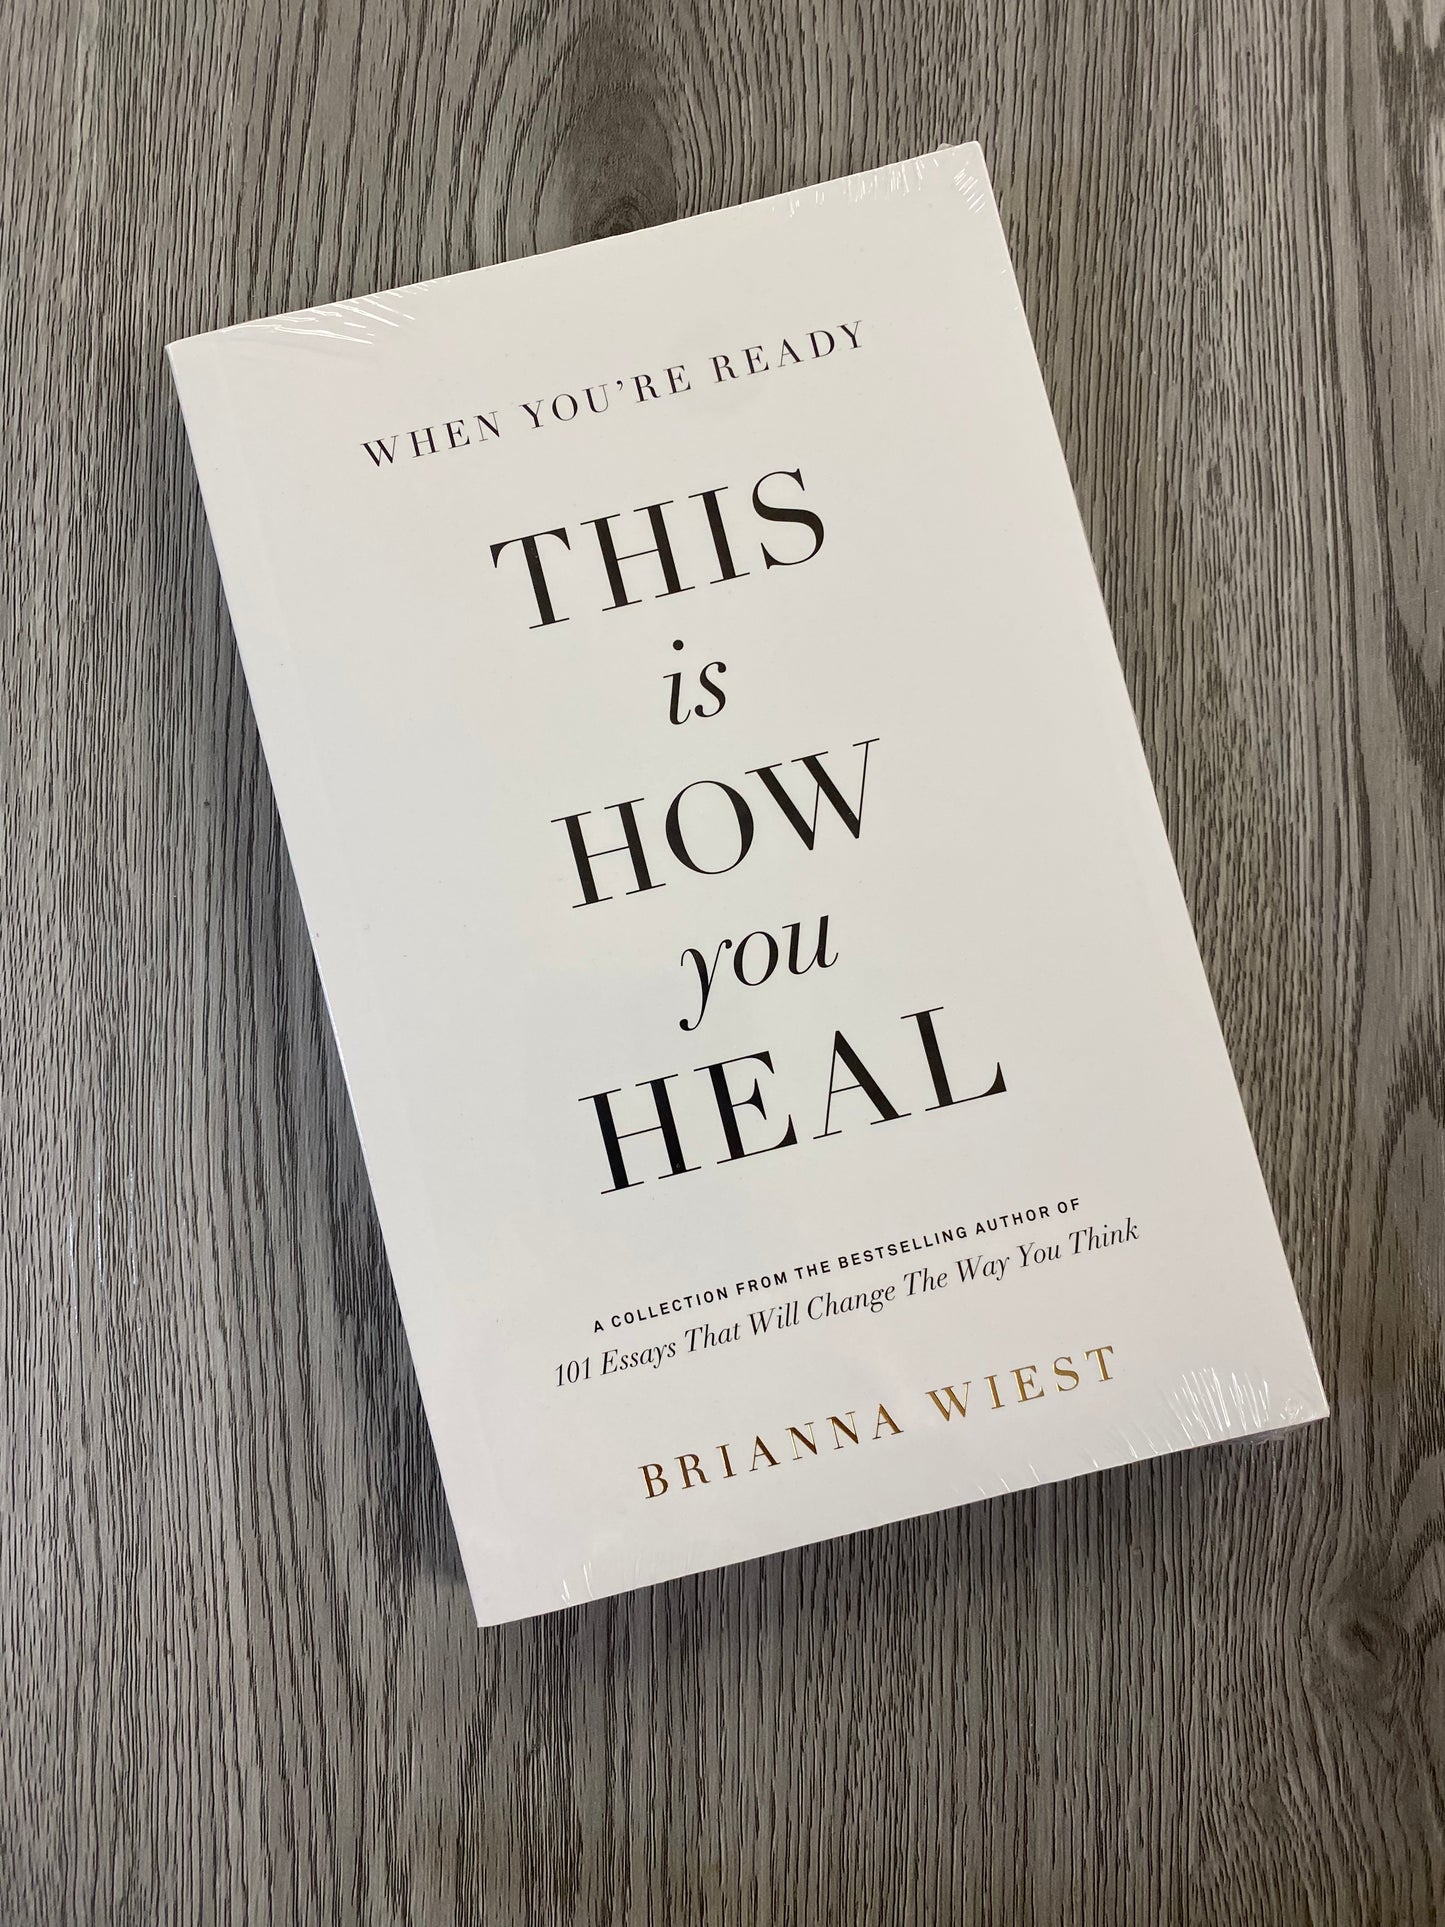 When You're Ready, This is How You Heal by Brianna Wiest-NEW